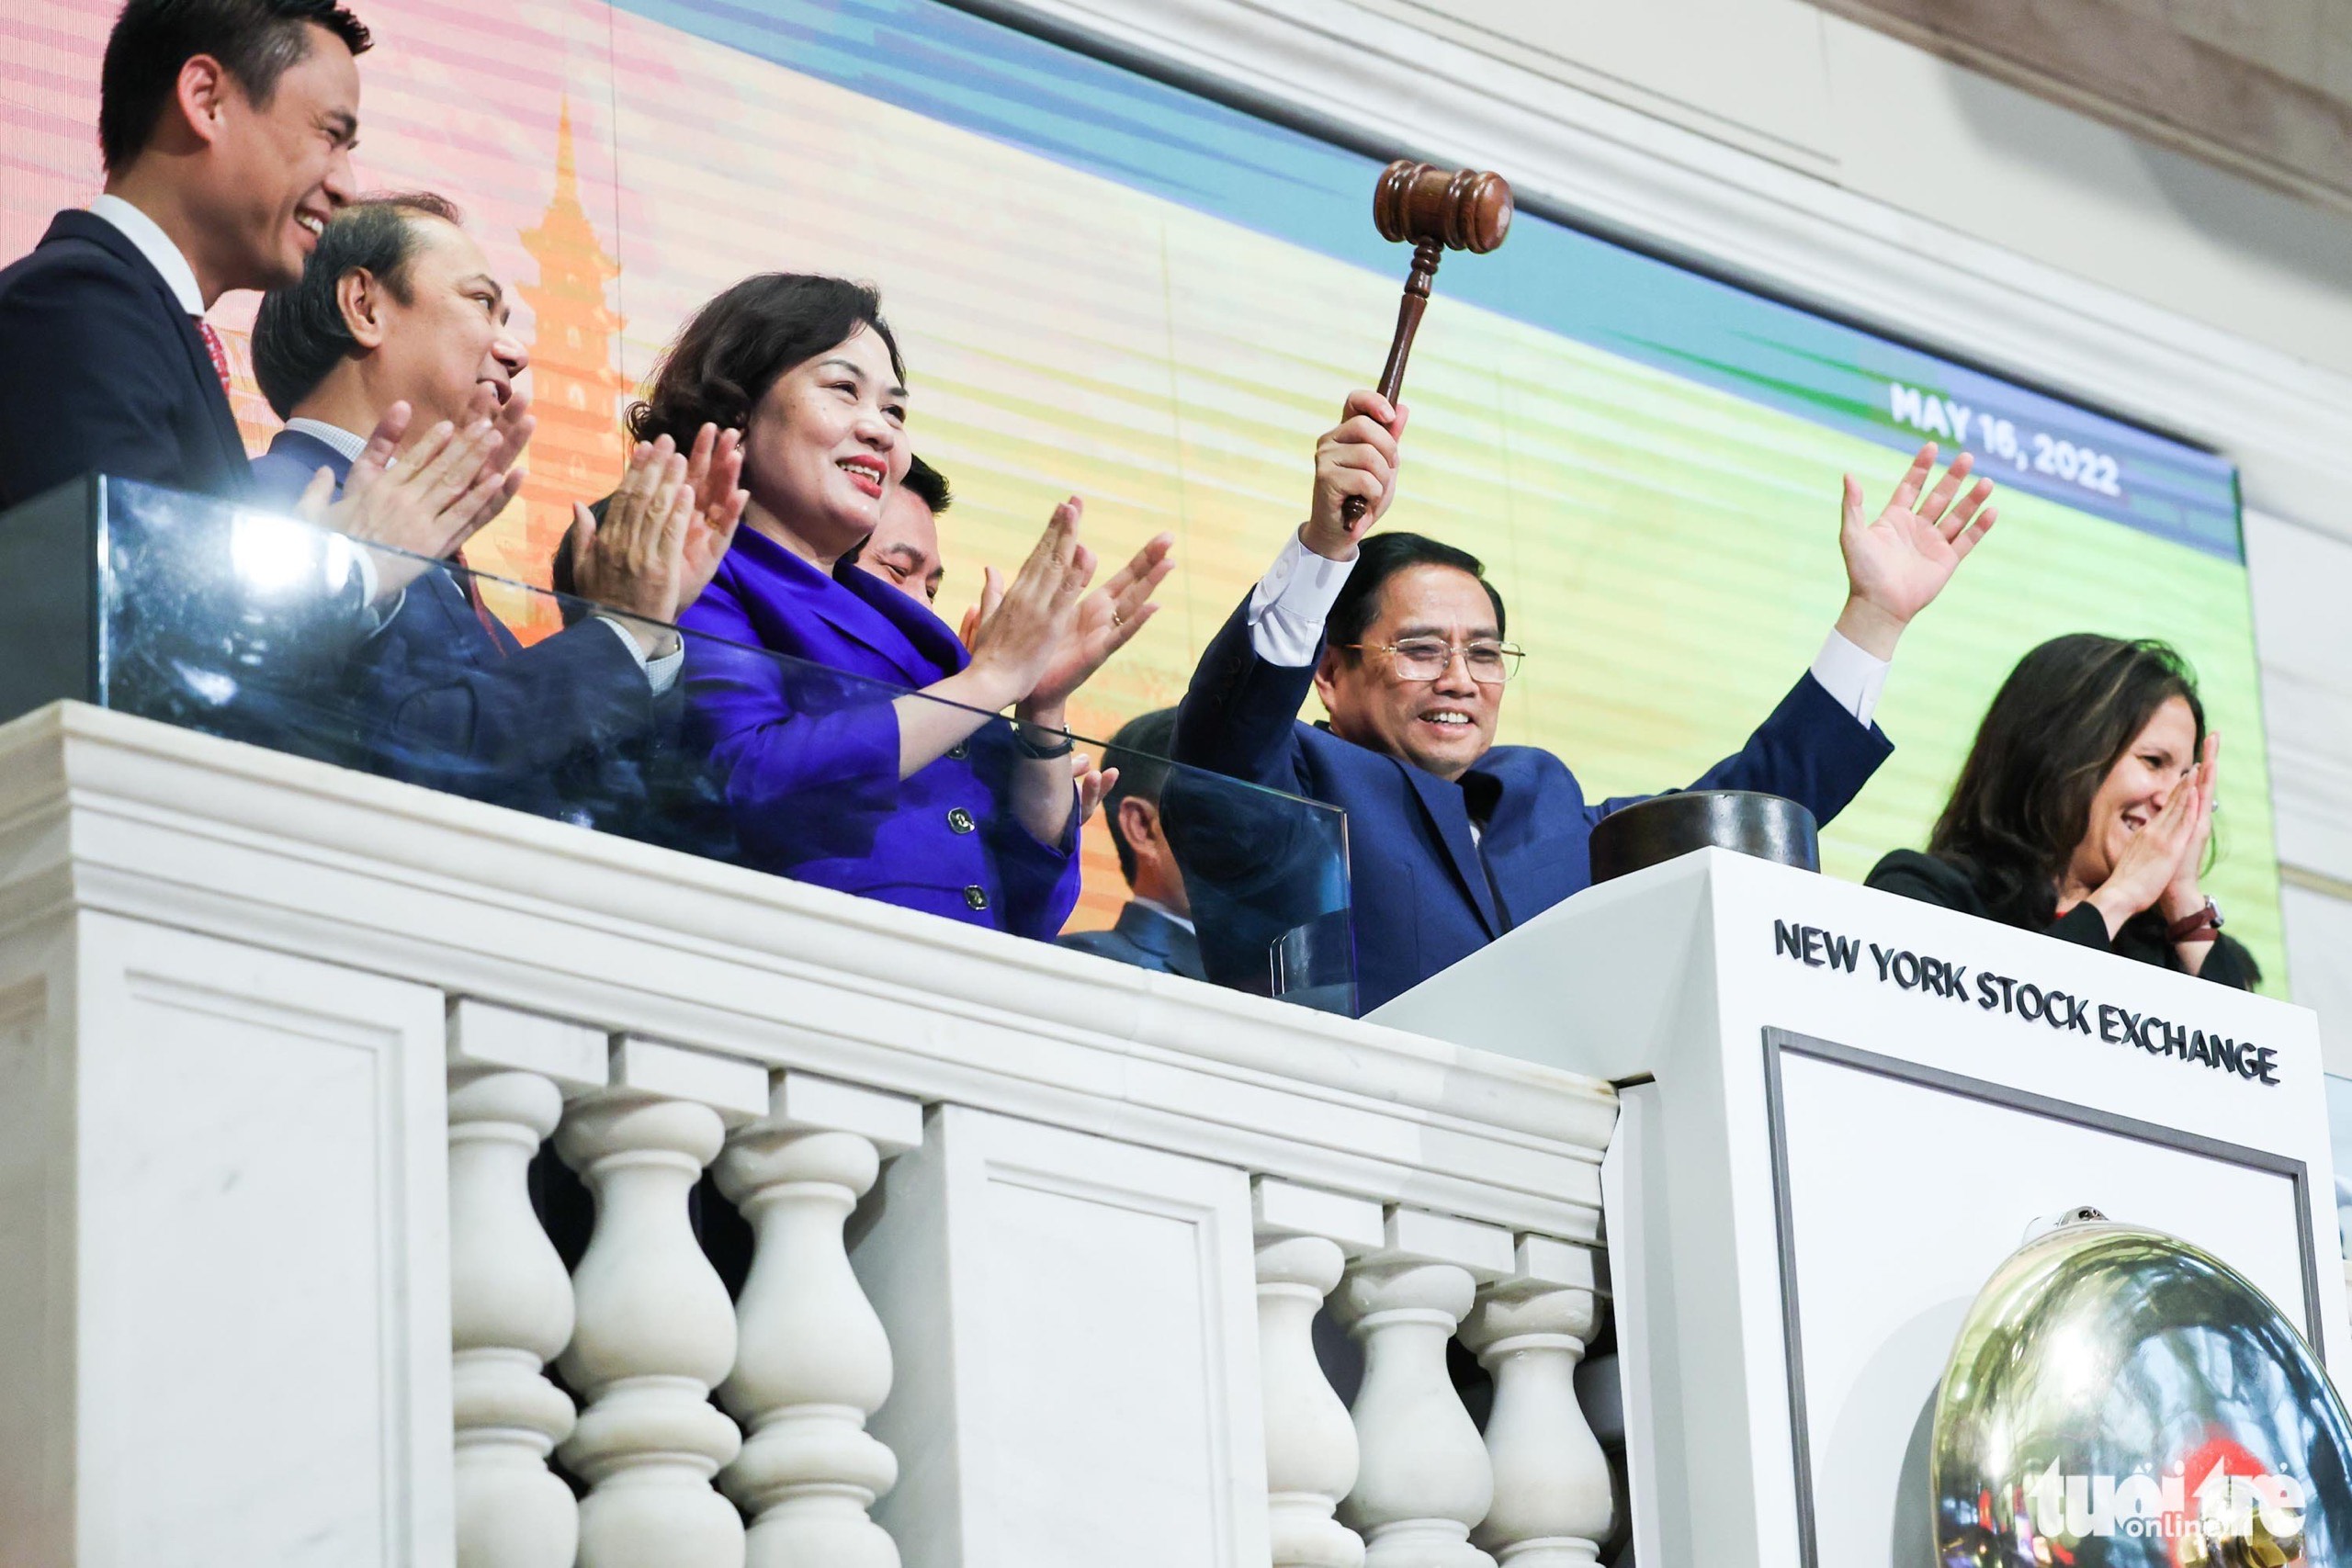 Vietnamese premier rings bell to close trading session at New York Stock Exchange